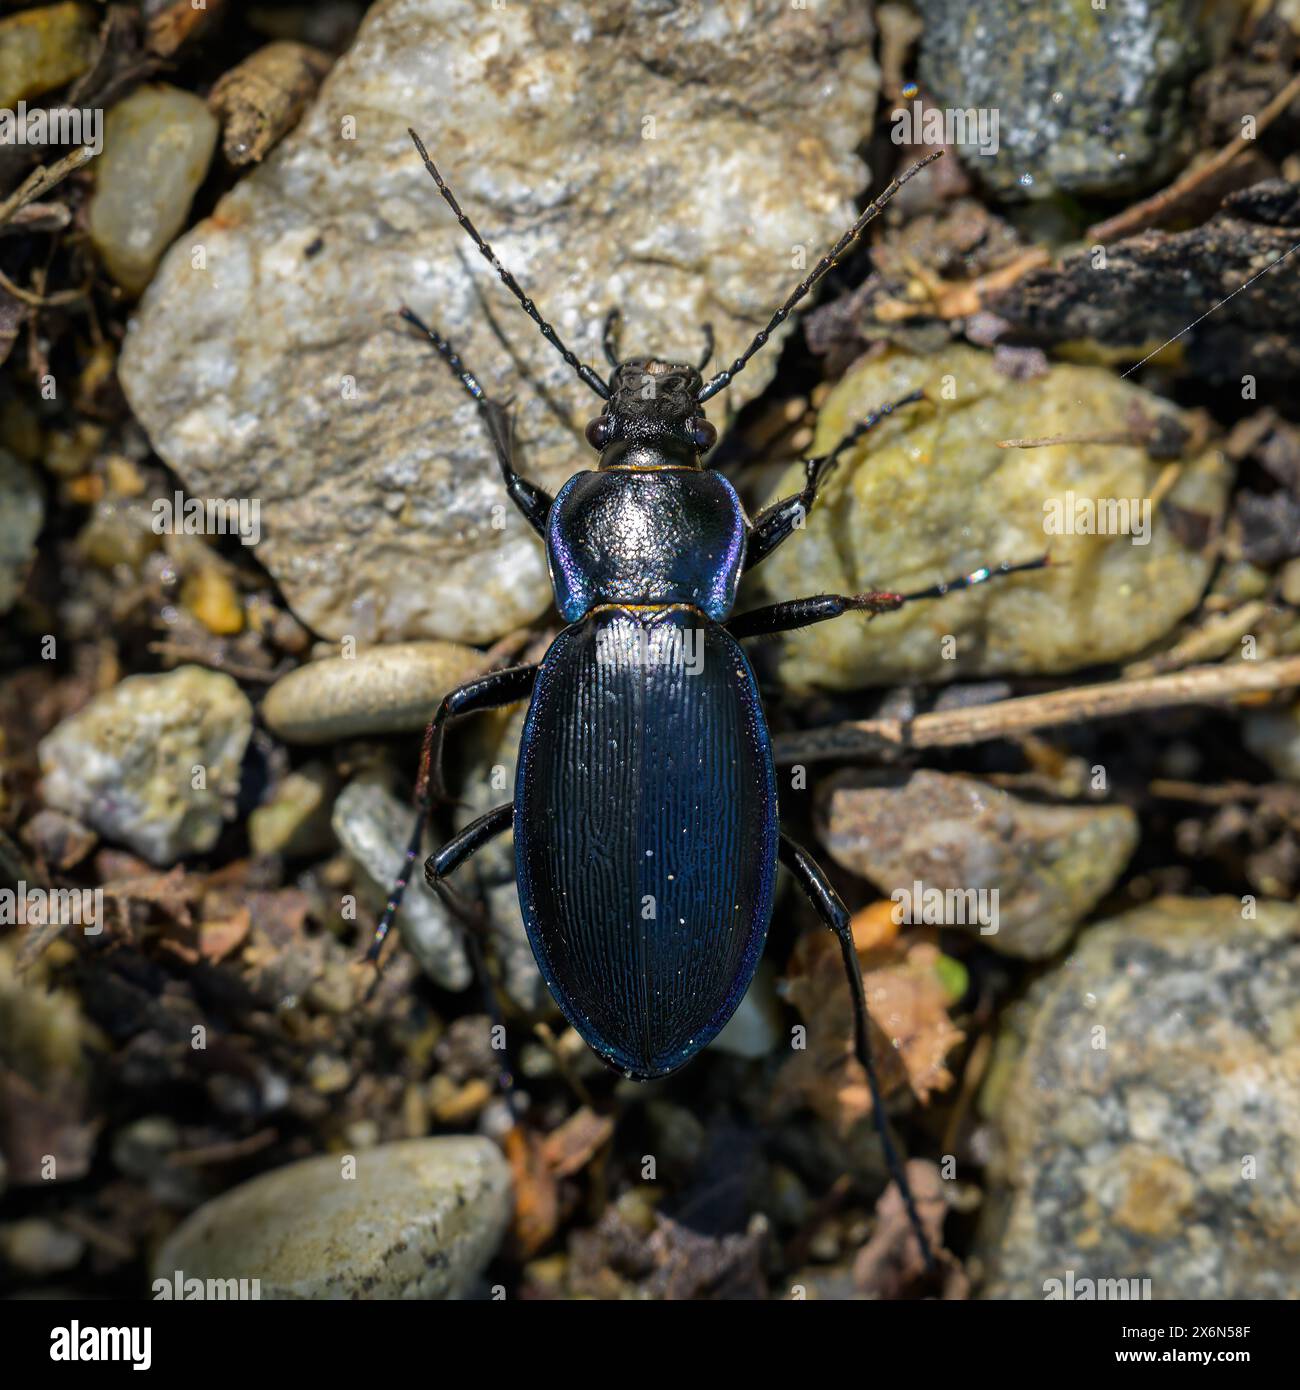 A big ground beetle (Carabus scheidleri) walking on the ground in a forest in Austria Stock Photo